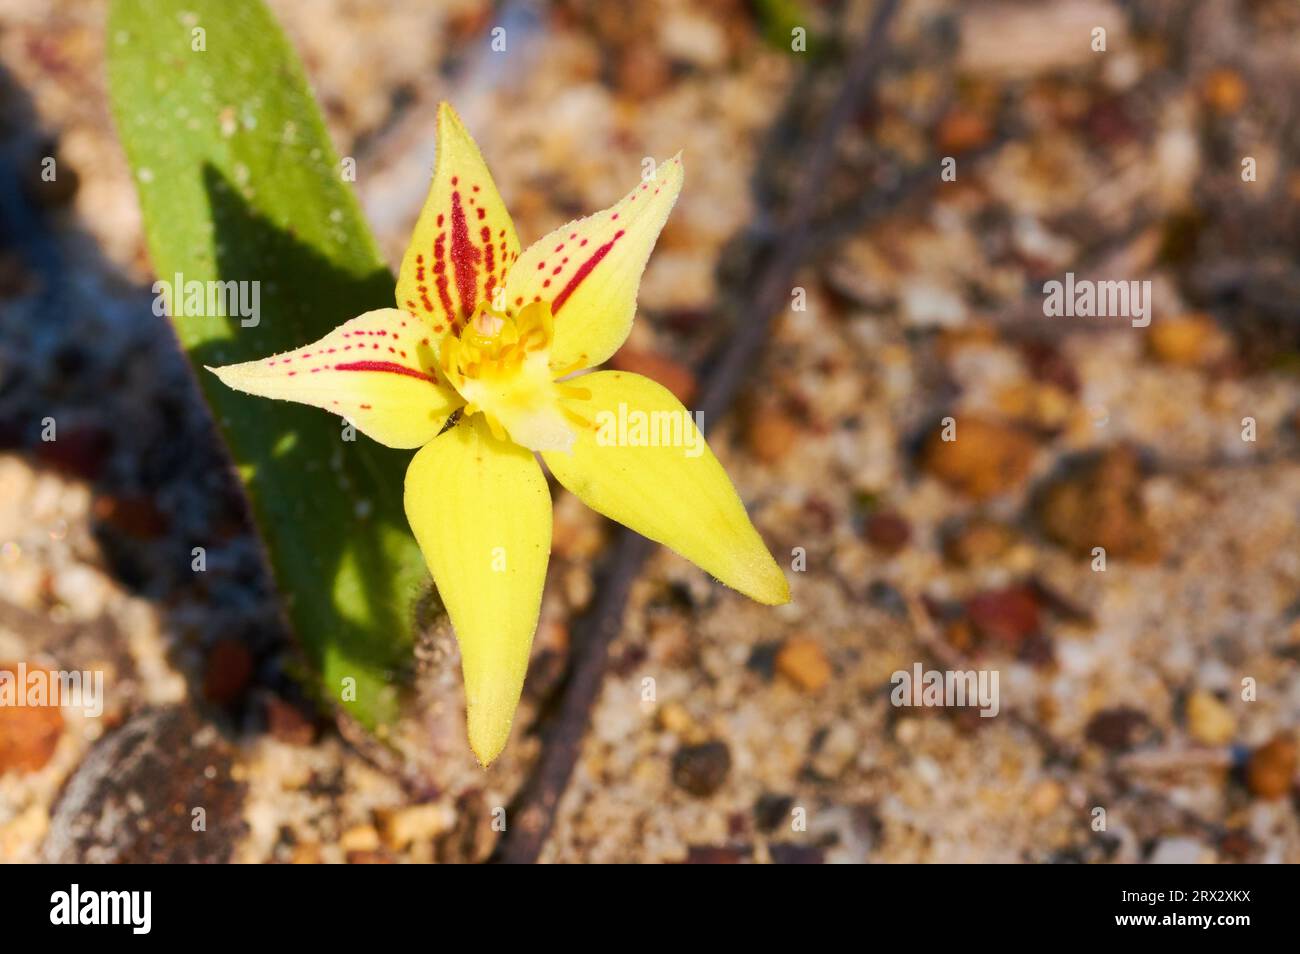 Cowslip Orchid, Caladenia flava, a wildflower species endemic to the south-west of Western Australia. It is yellow with red markings. Stock Photo